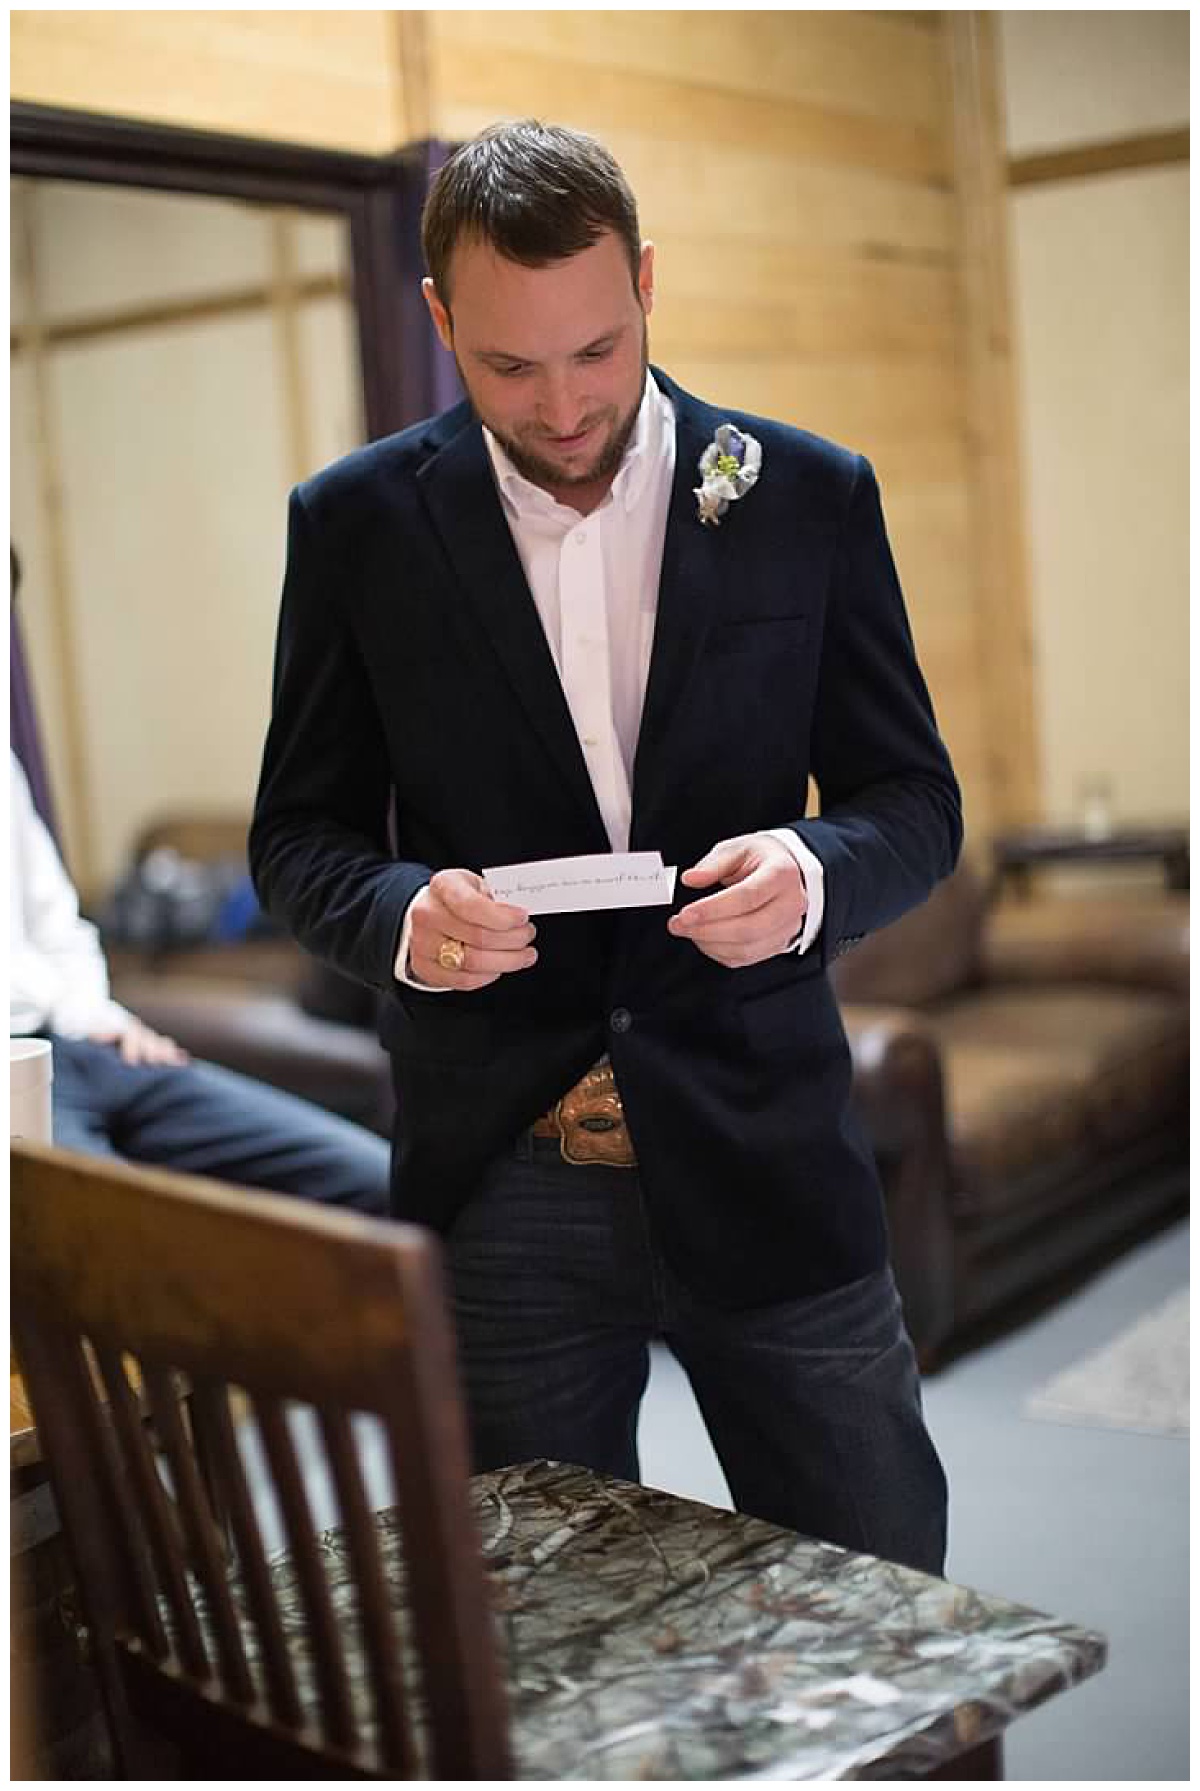 Letter by the Bride Before The Wedding in Texas at Emery's Buffalo Creek 